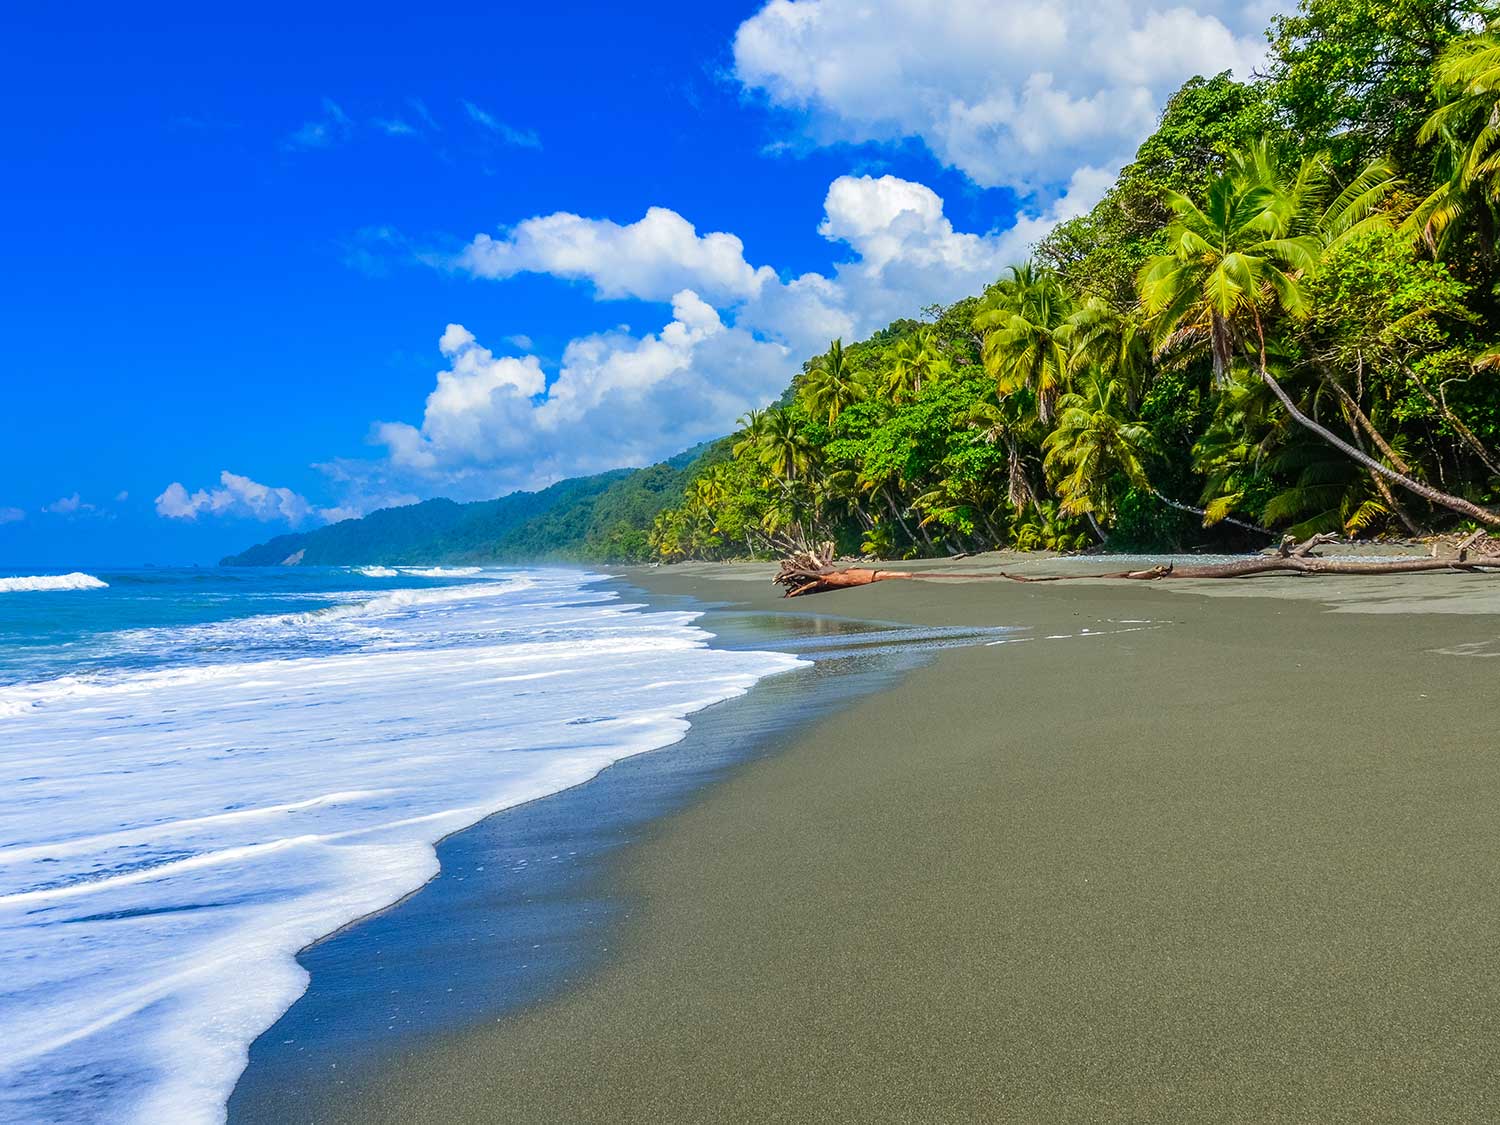 Corcovado National Park shows off amazing scenery